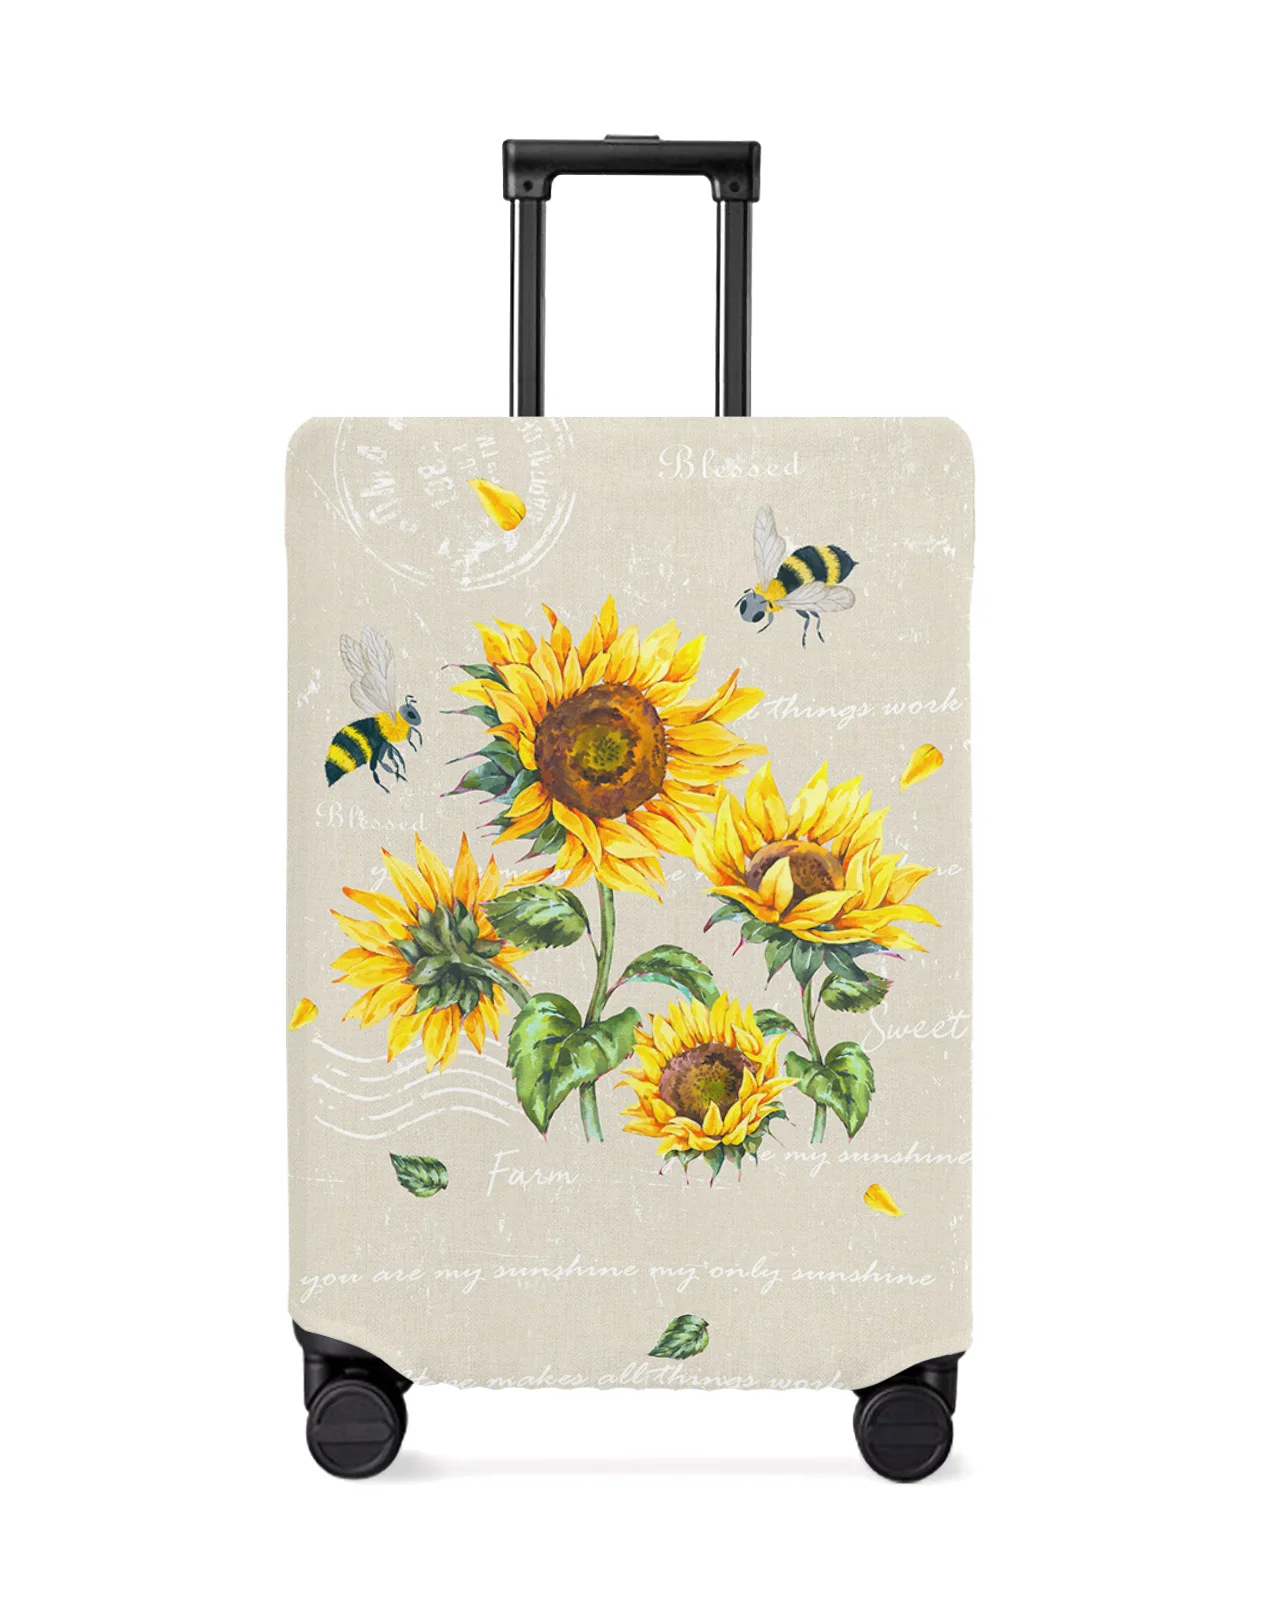 

Farm Rustic Retro Flowers Sunflower Bee Luggage Cover Stretch Baggage Protector Dust Cover for 18-32 Inch Travel Suitcase Case